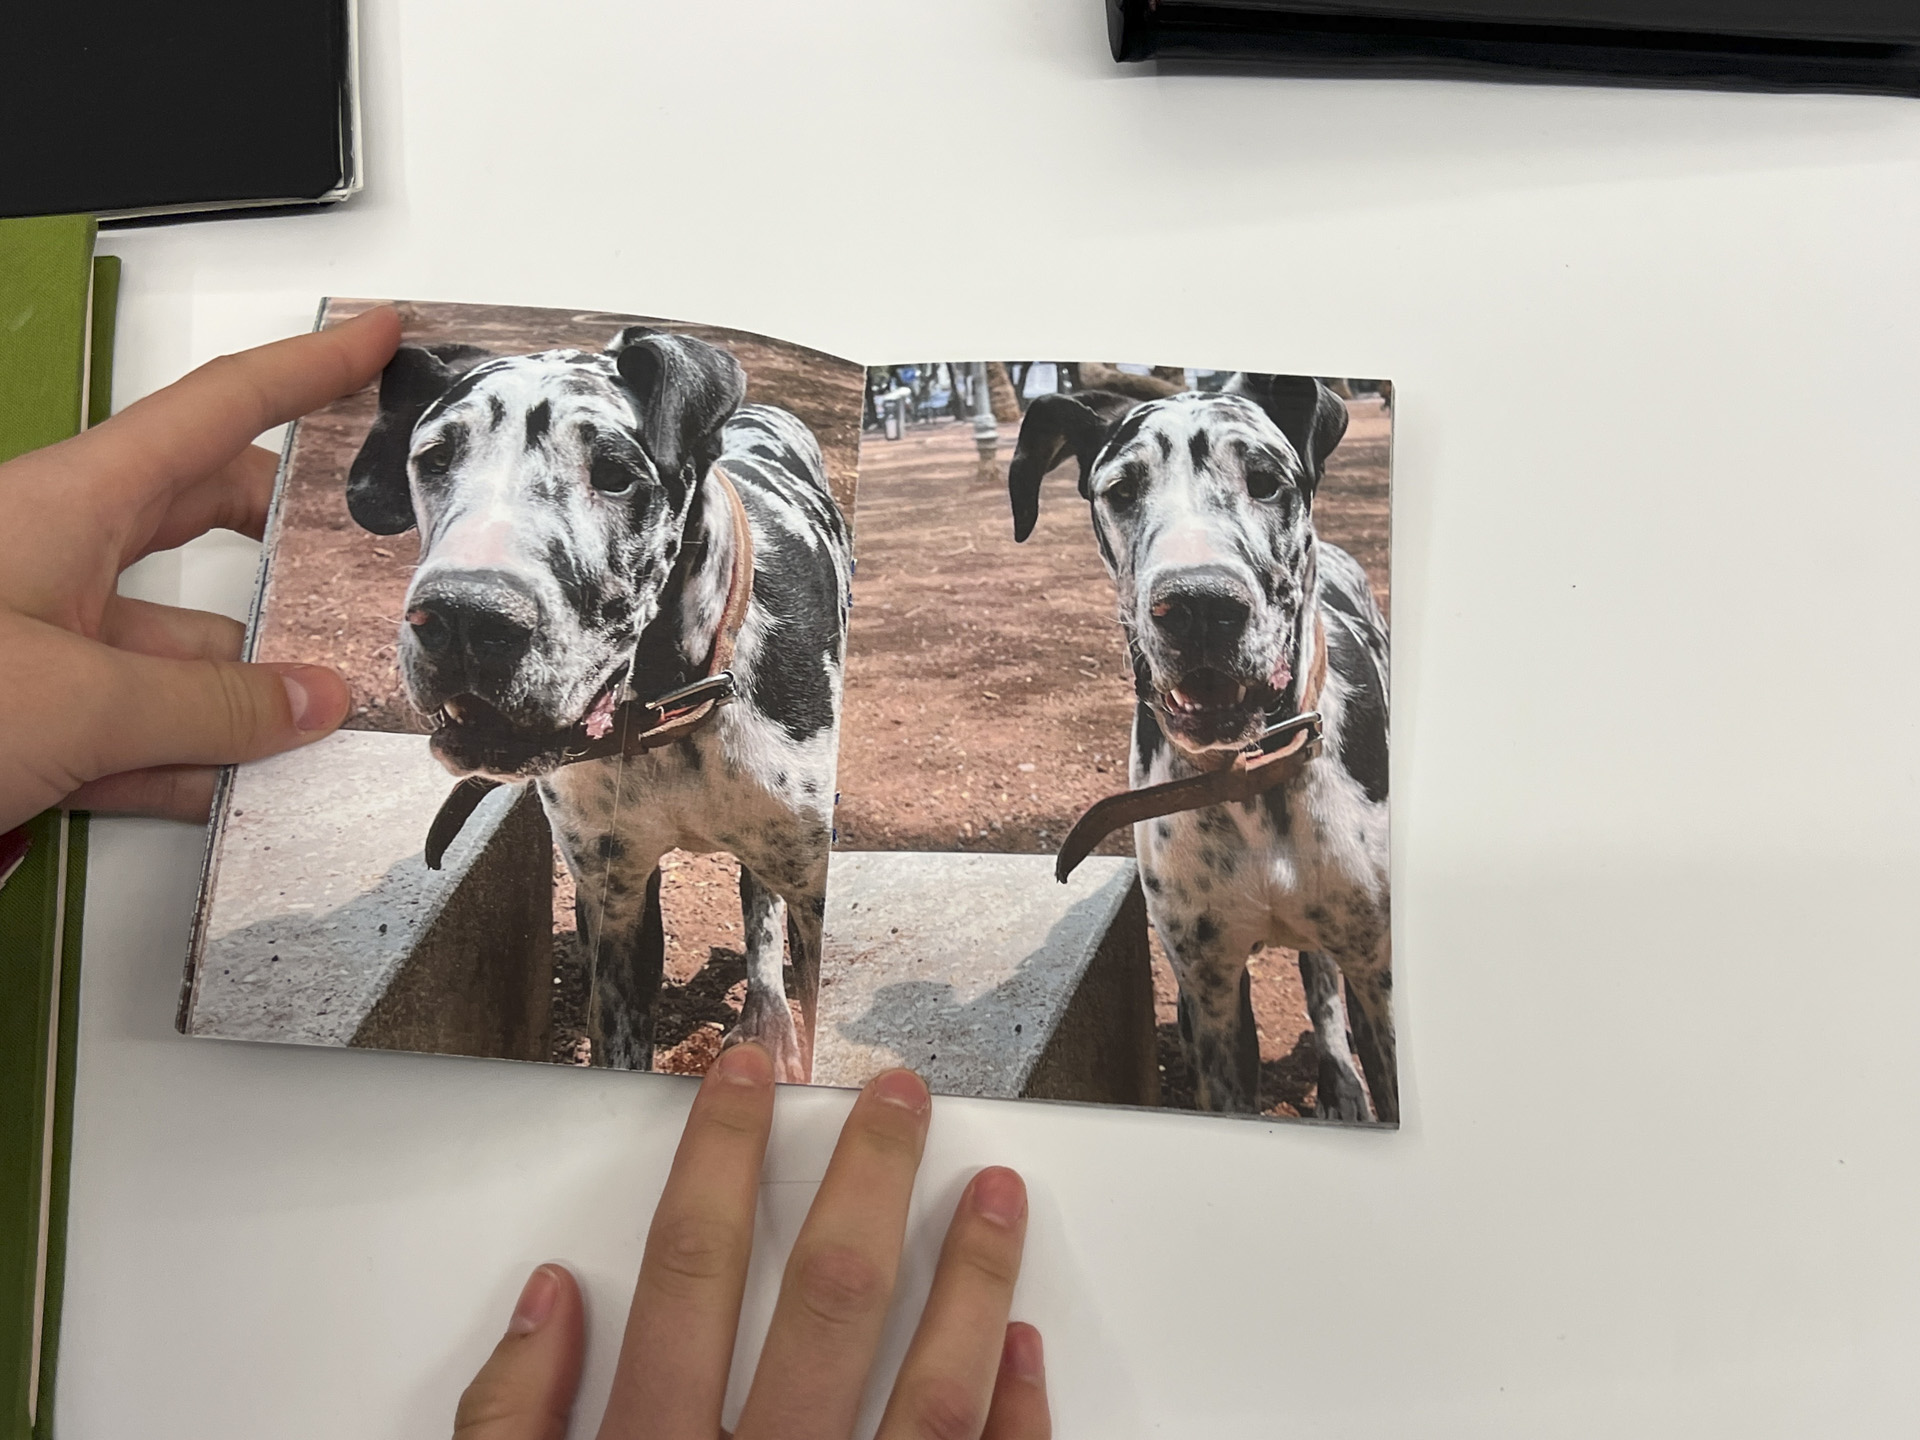 book opened to a photo of a dog vs photo of a dog